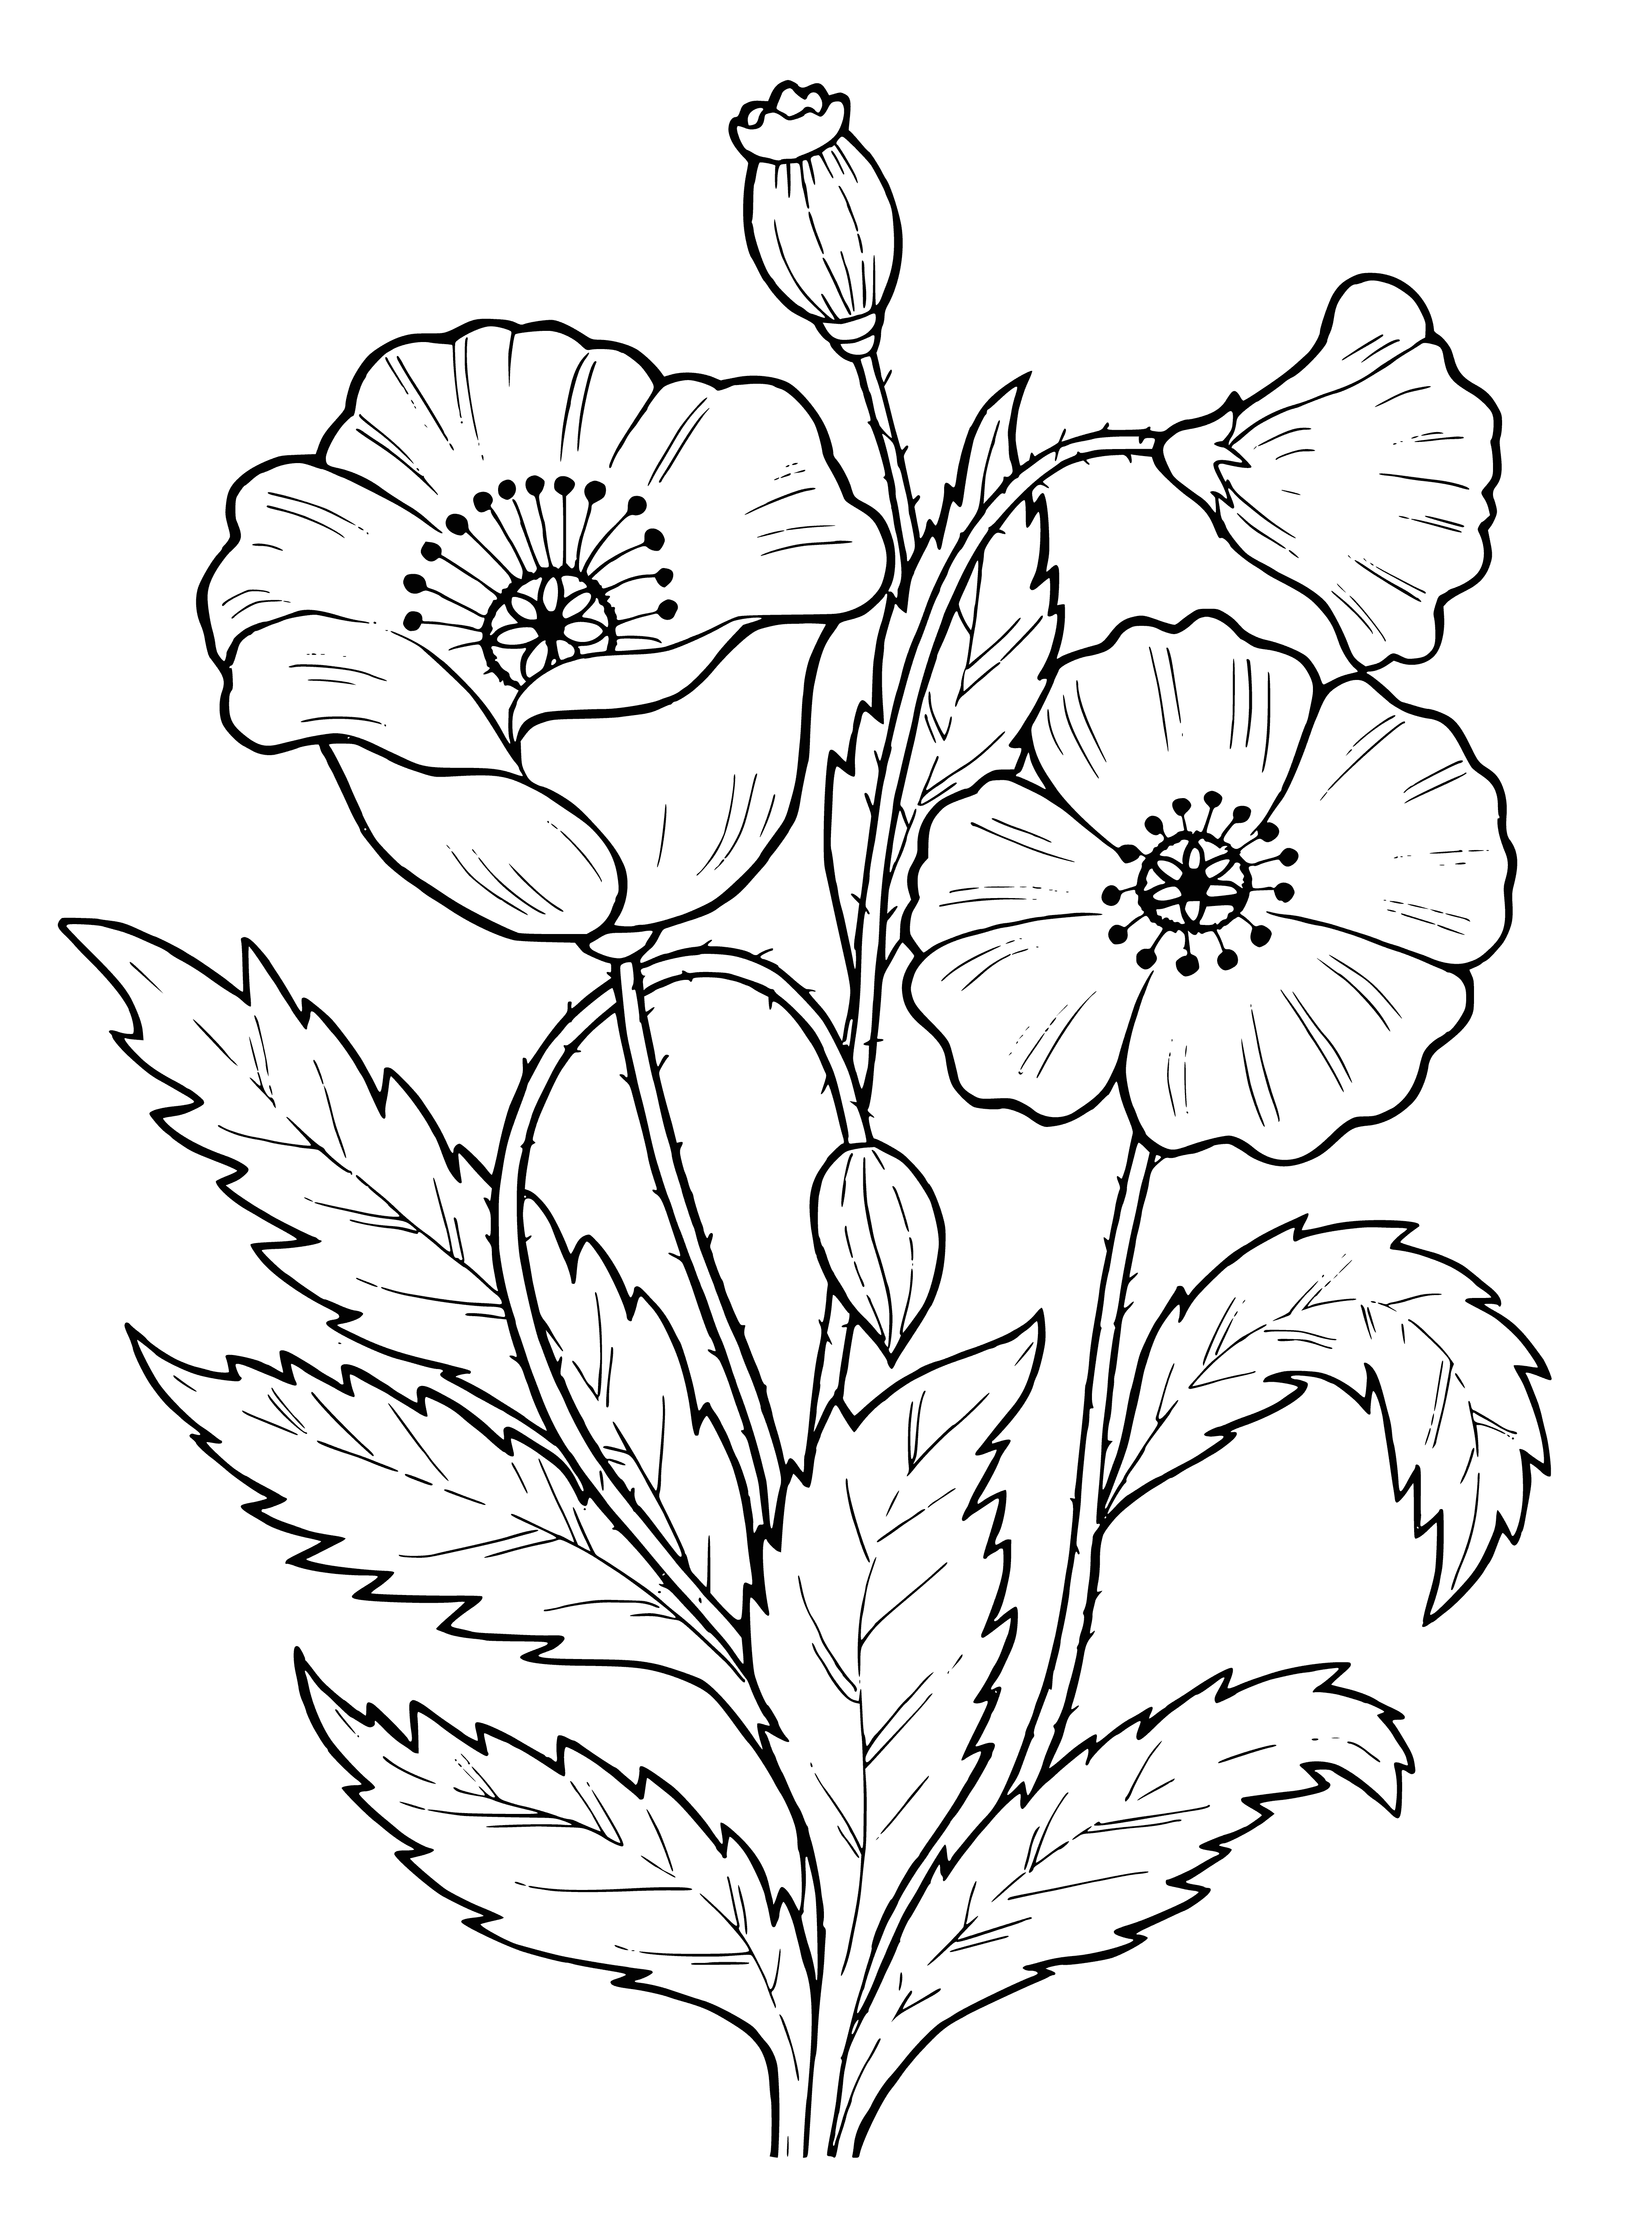 coloring page: Fancy flowers in different colors w/ large petals arranged in a circular pattern, green stems/leaves, symetrical leaves & blue background. #coloringpage